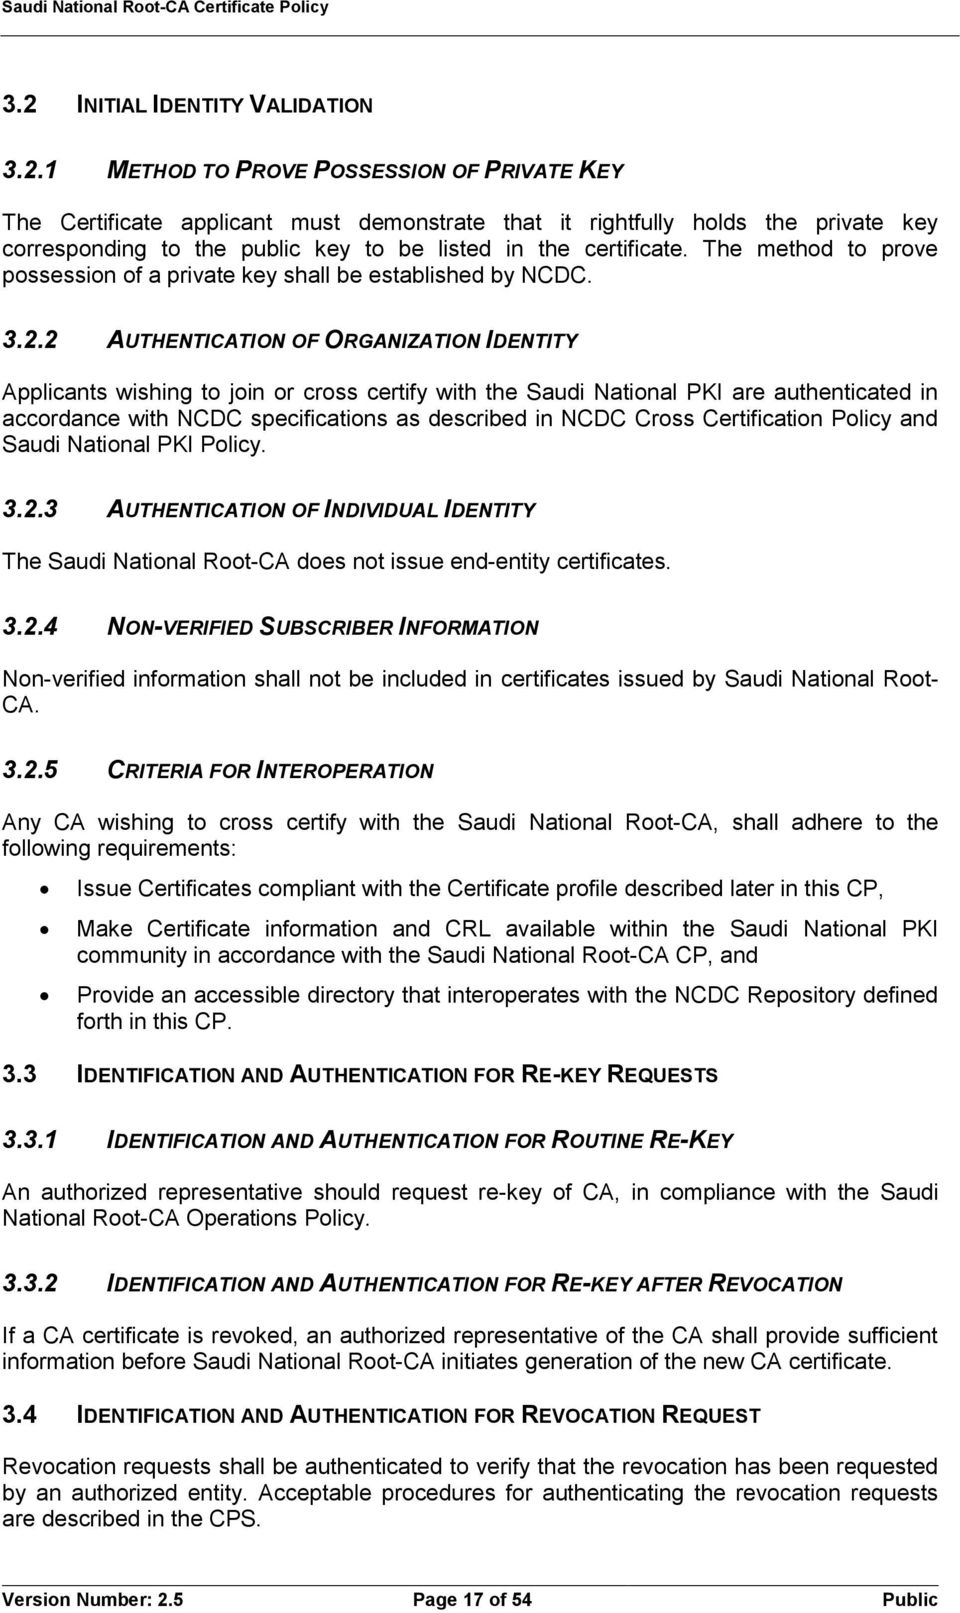 2 AUTHENTICATION OF ORGANIZATION IDENTITY Applicants wishing to join or cross certify with the Saudi National PKI are authenticated in accordance with NCDC specifications as described in NCDC Cross